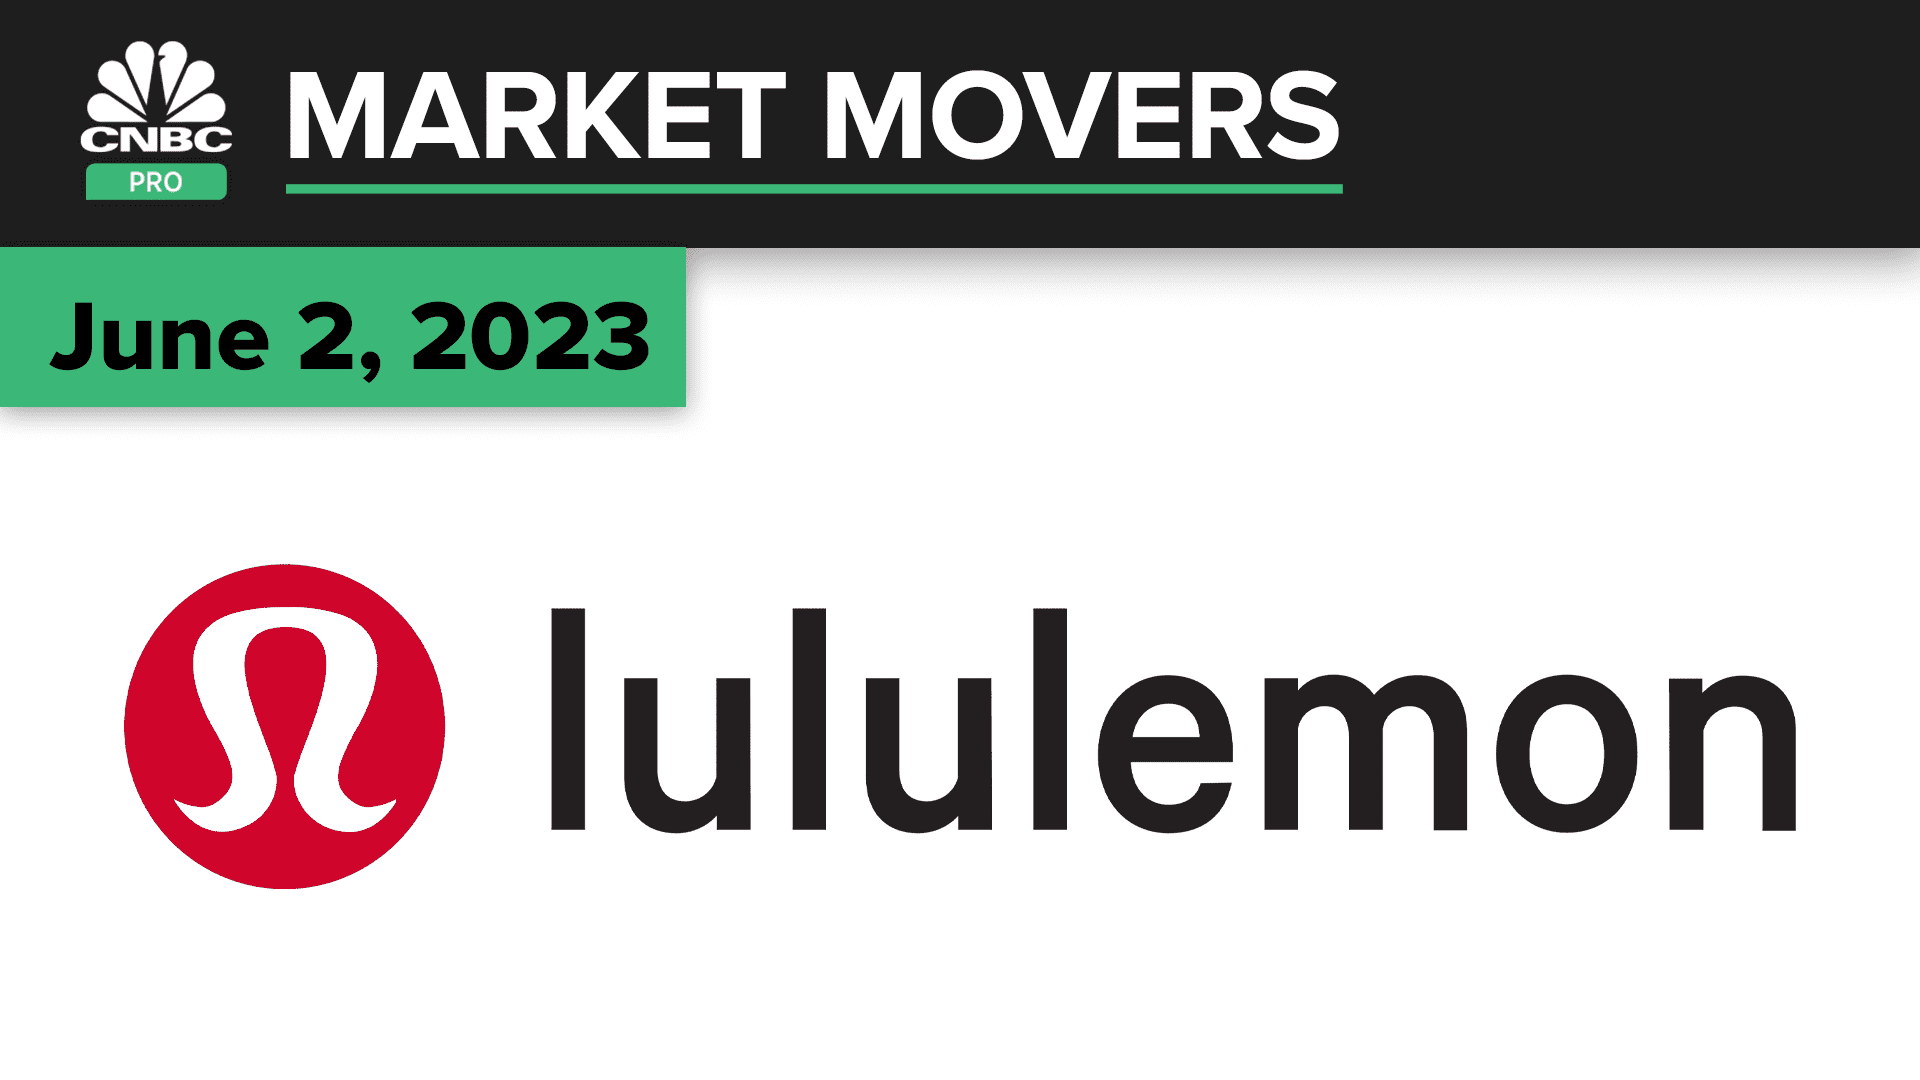 Lululemon shares surge after quarterly earnings beat. How to play the stock now